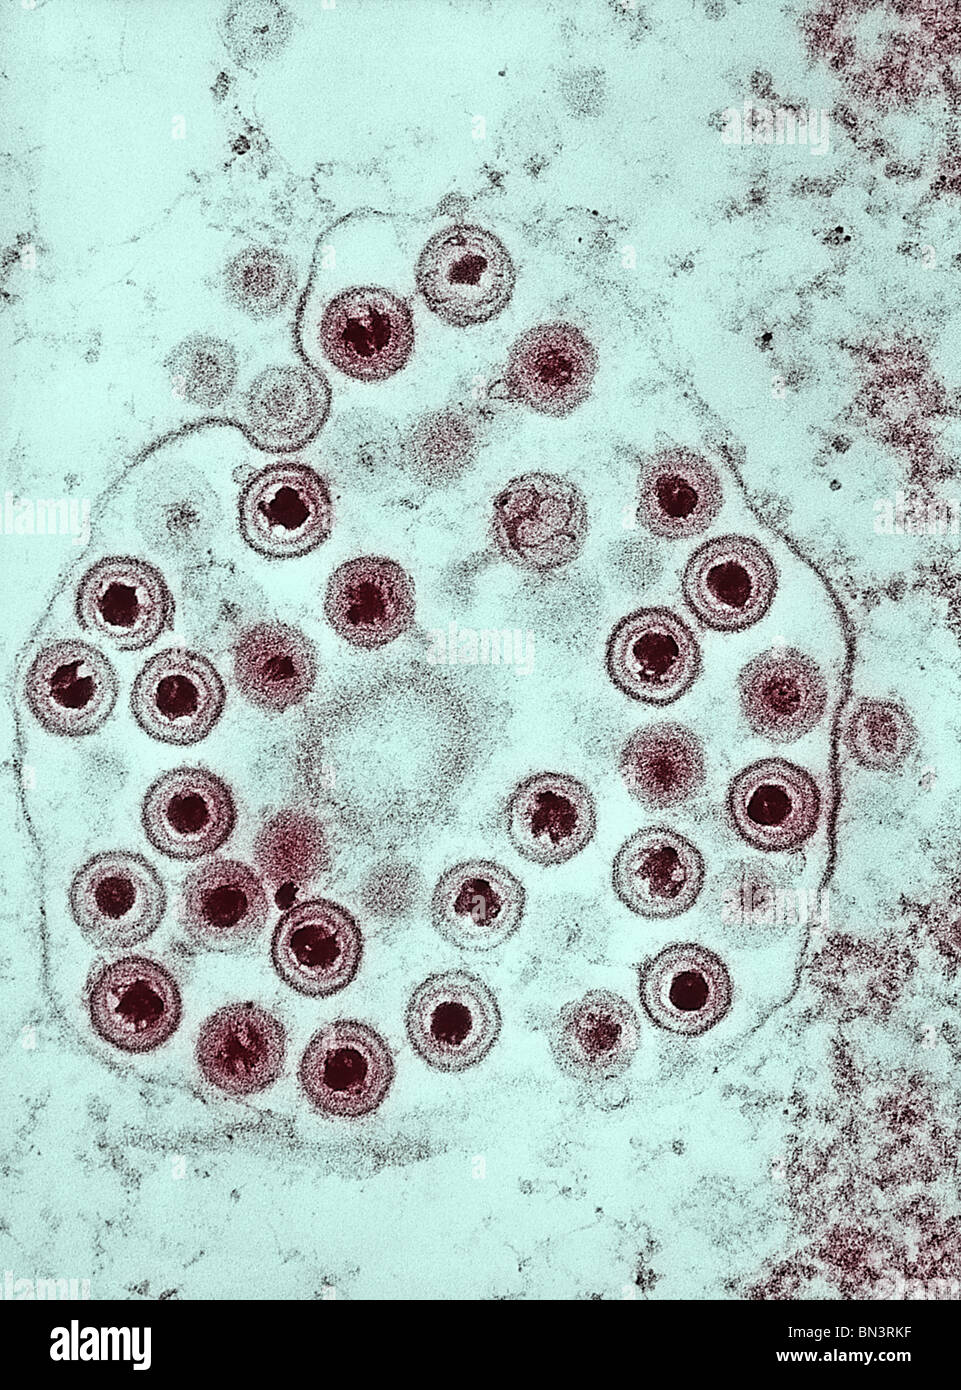 Negatively-stained transmission electron micrograph (TEM) of numerous herpes simplex virions Stock Photo